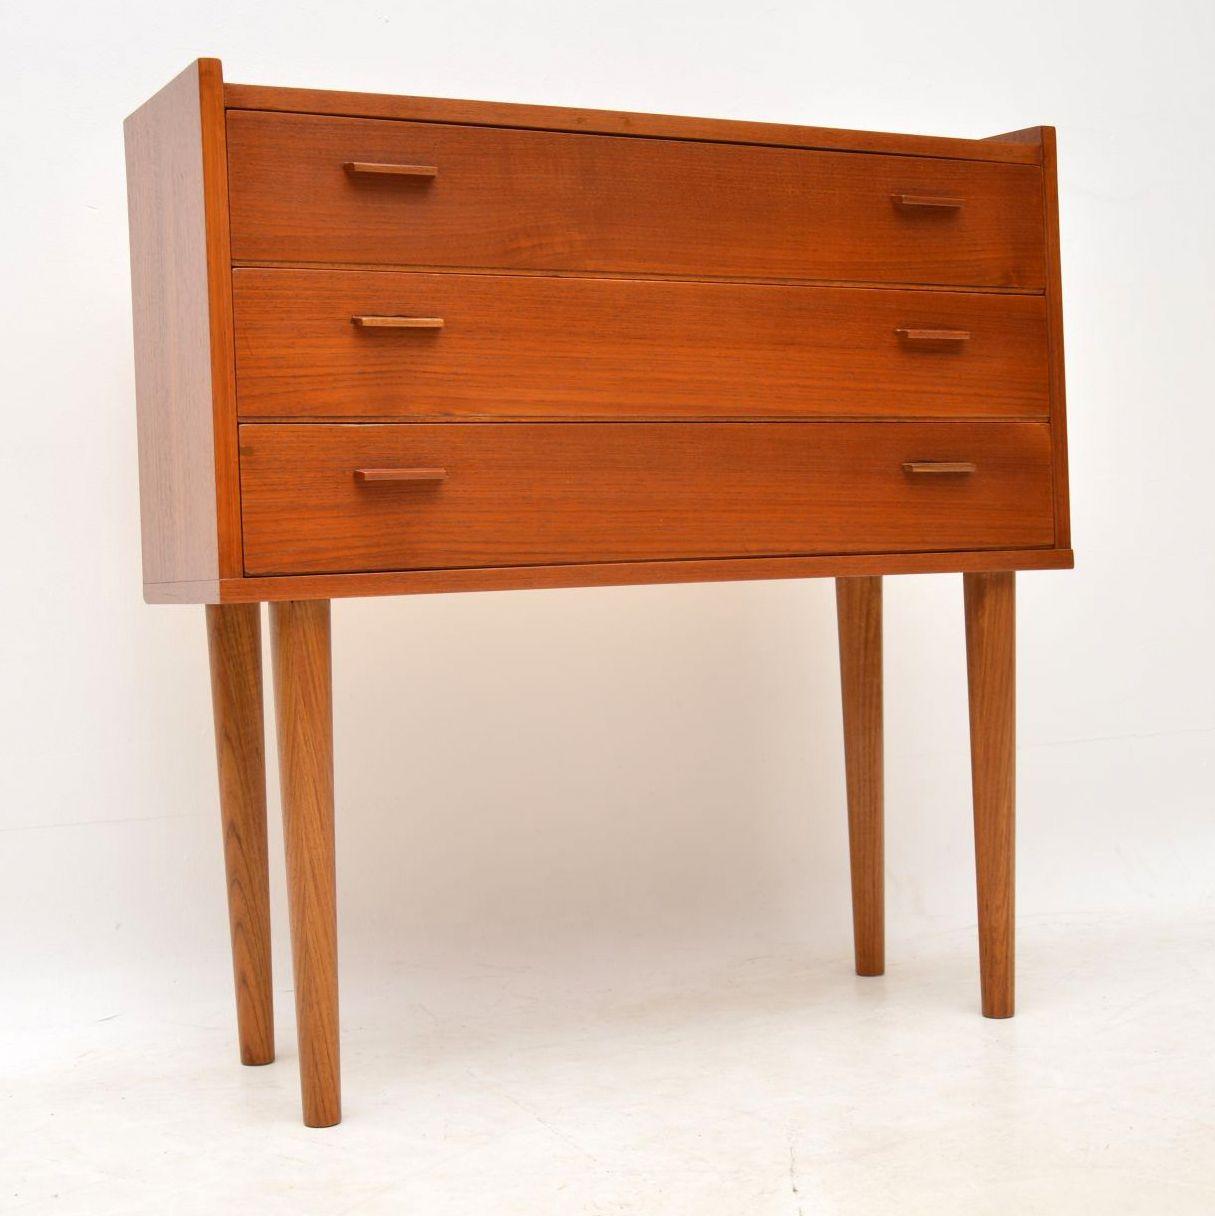 A stylish and petite Danish vintage chest of drawers in teak, this dates from the 1960s. This is in superb condition, we’ve had it stripped and re-polished to a very high standard.

Measures: Width – 76 cm, 30 inches
Depth – 28 cm, 11